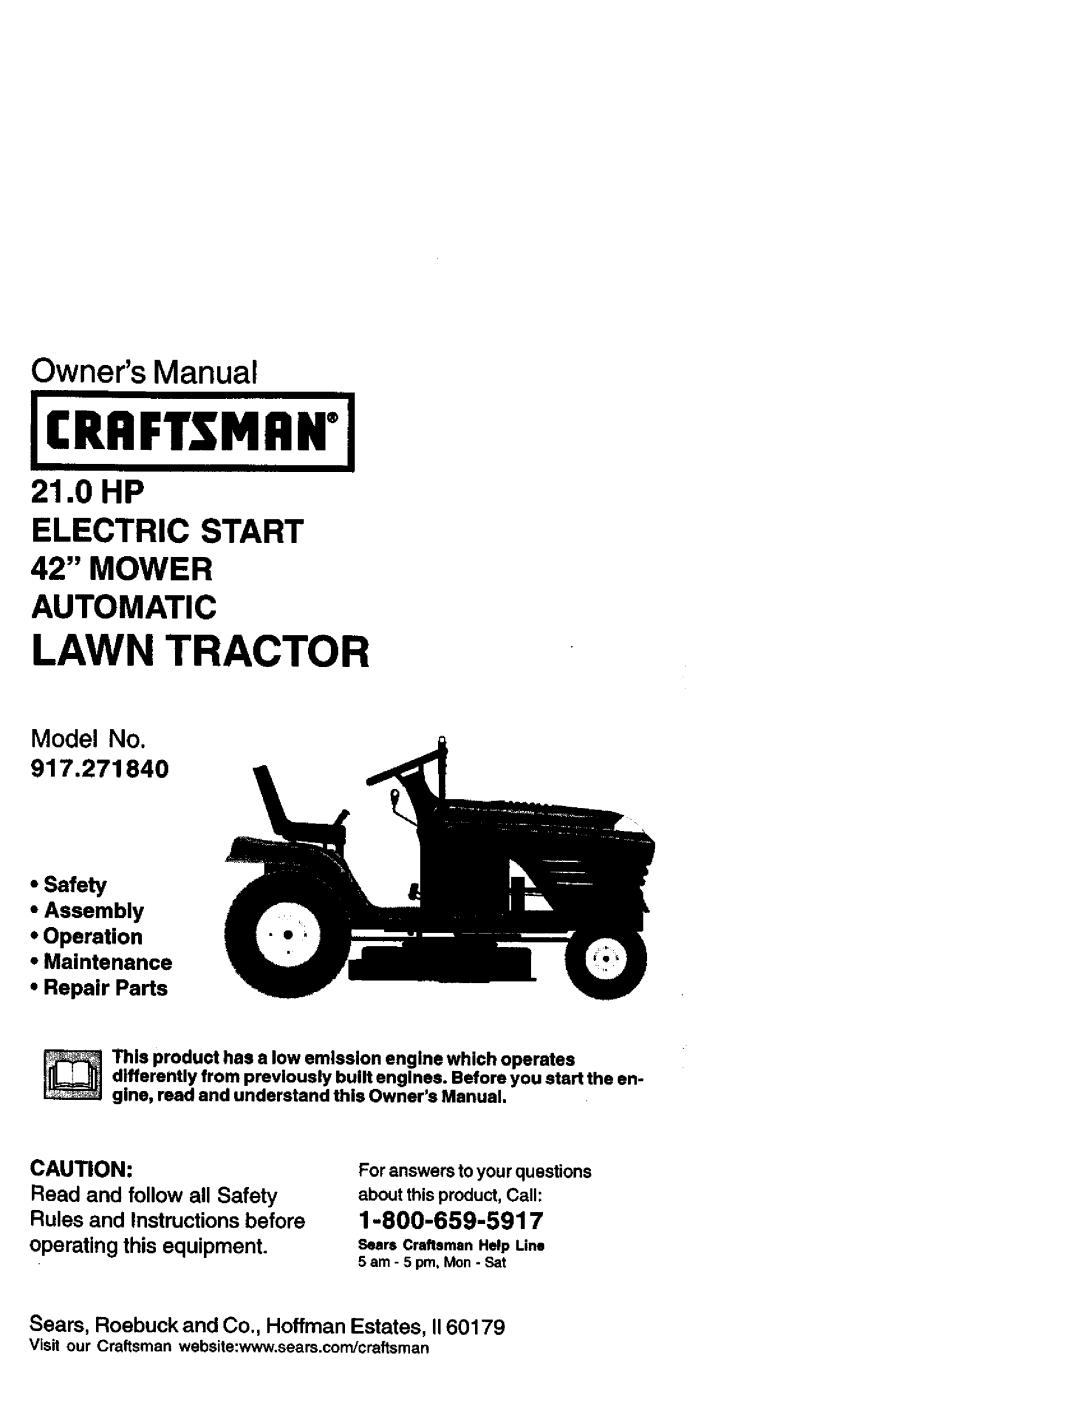 Craftsman 917.27184 owner manual Safety Assembly Operation Maintenance, Repair Parts, operating this equipment, Model No 